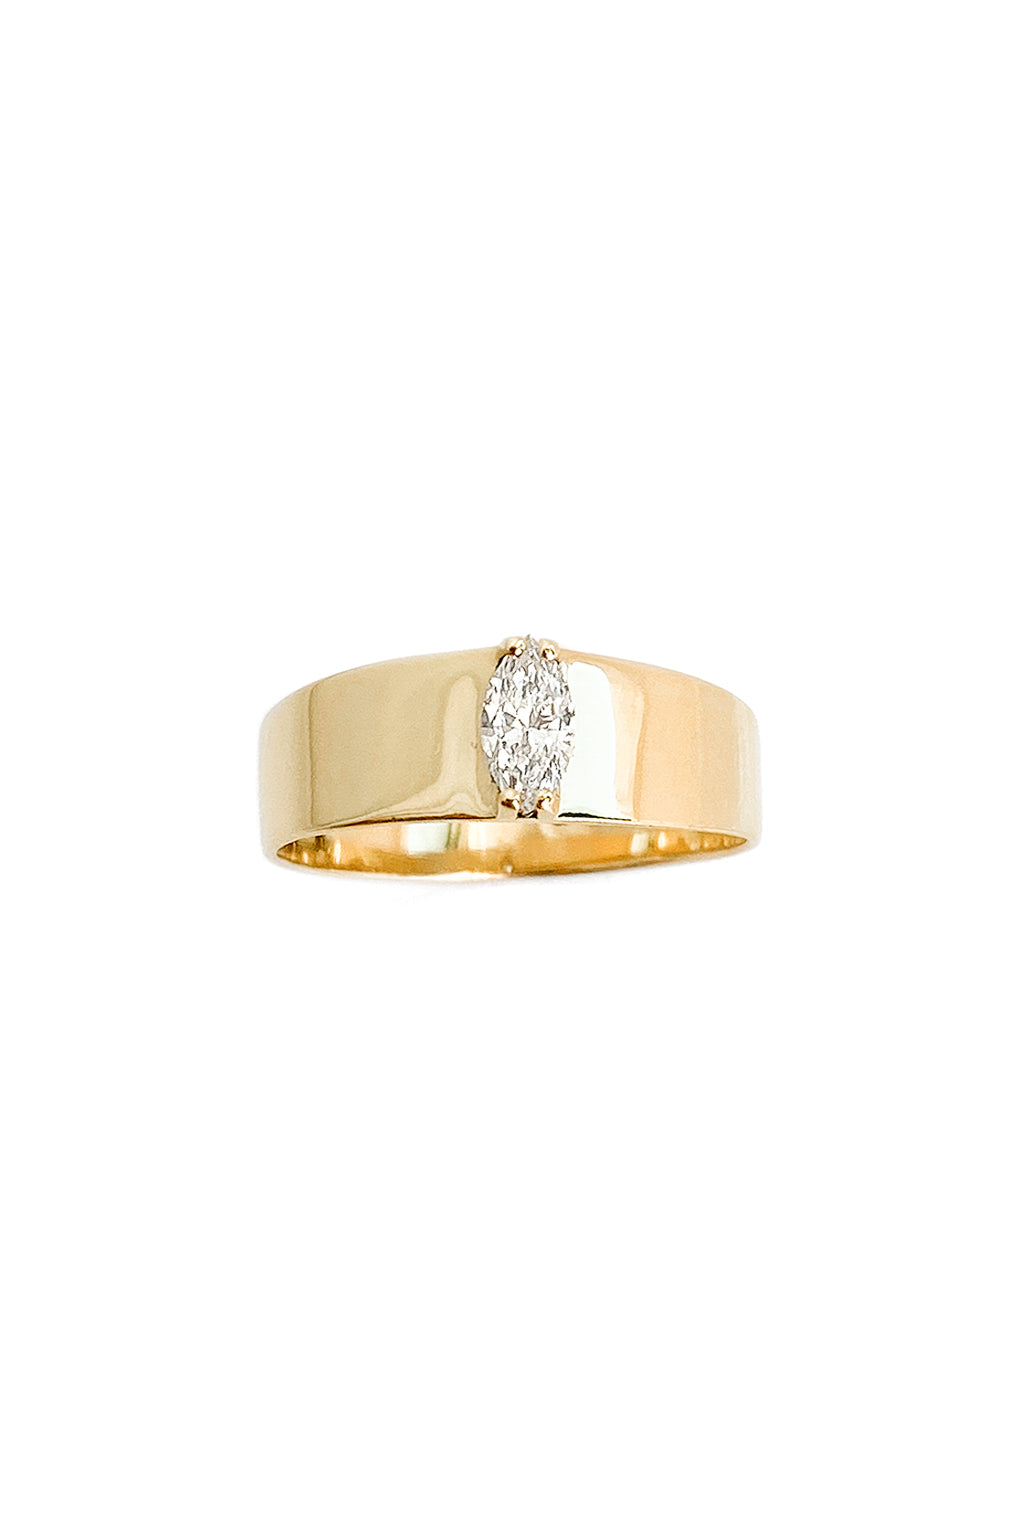 Band marquise 6 x 3 mm gold ring